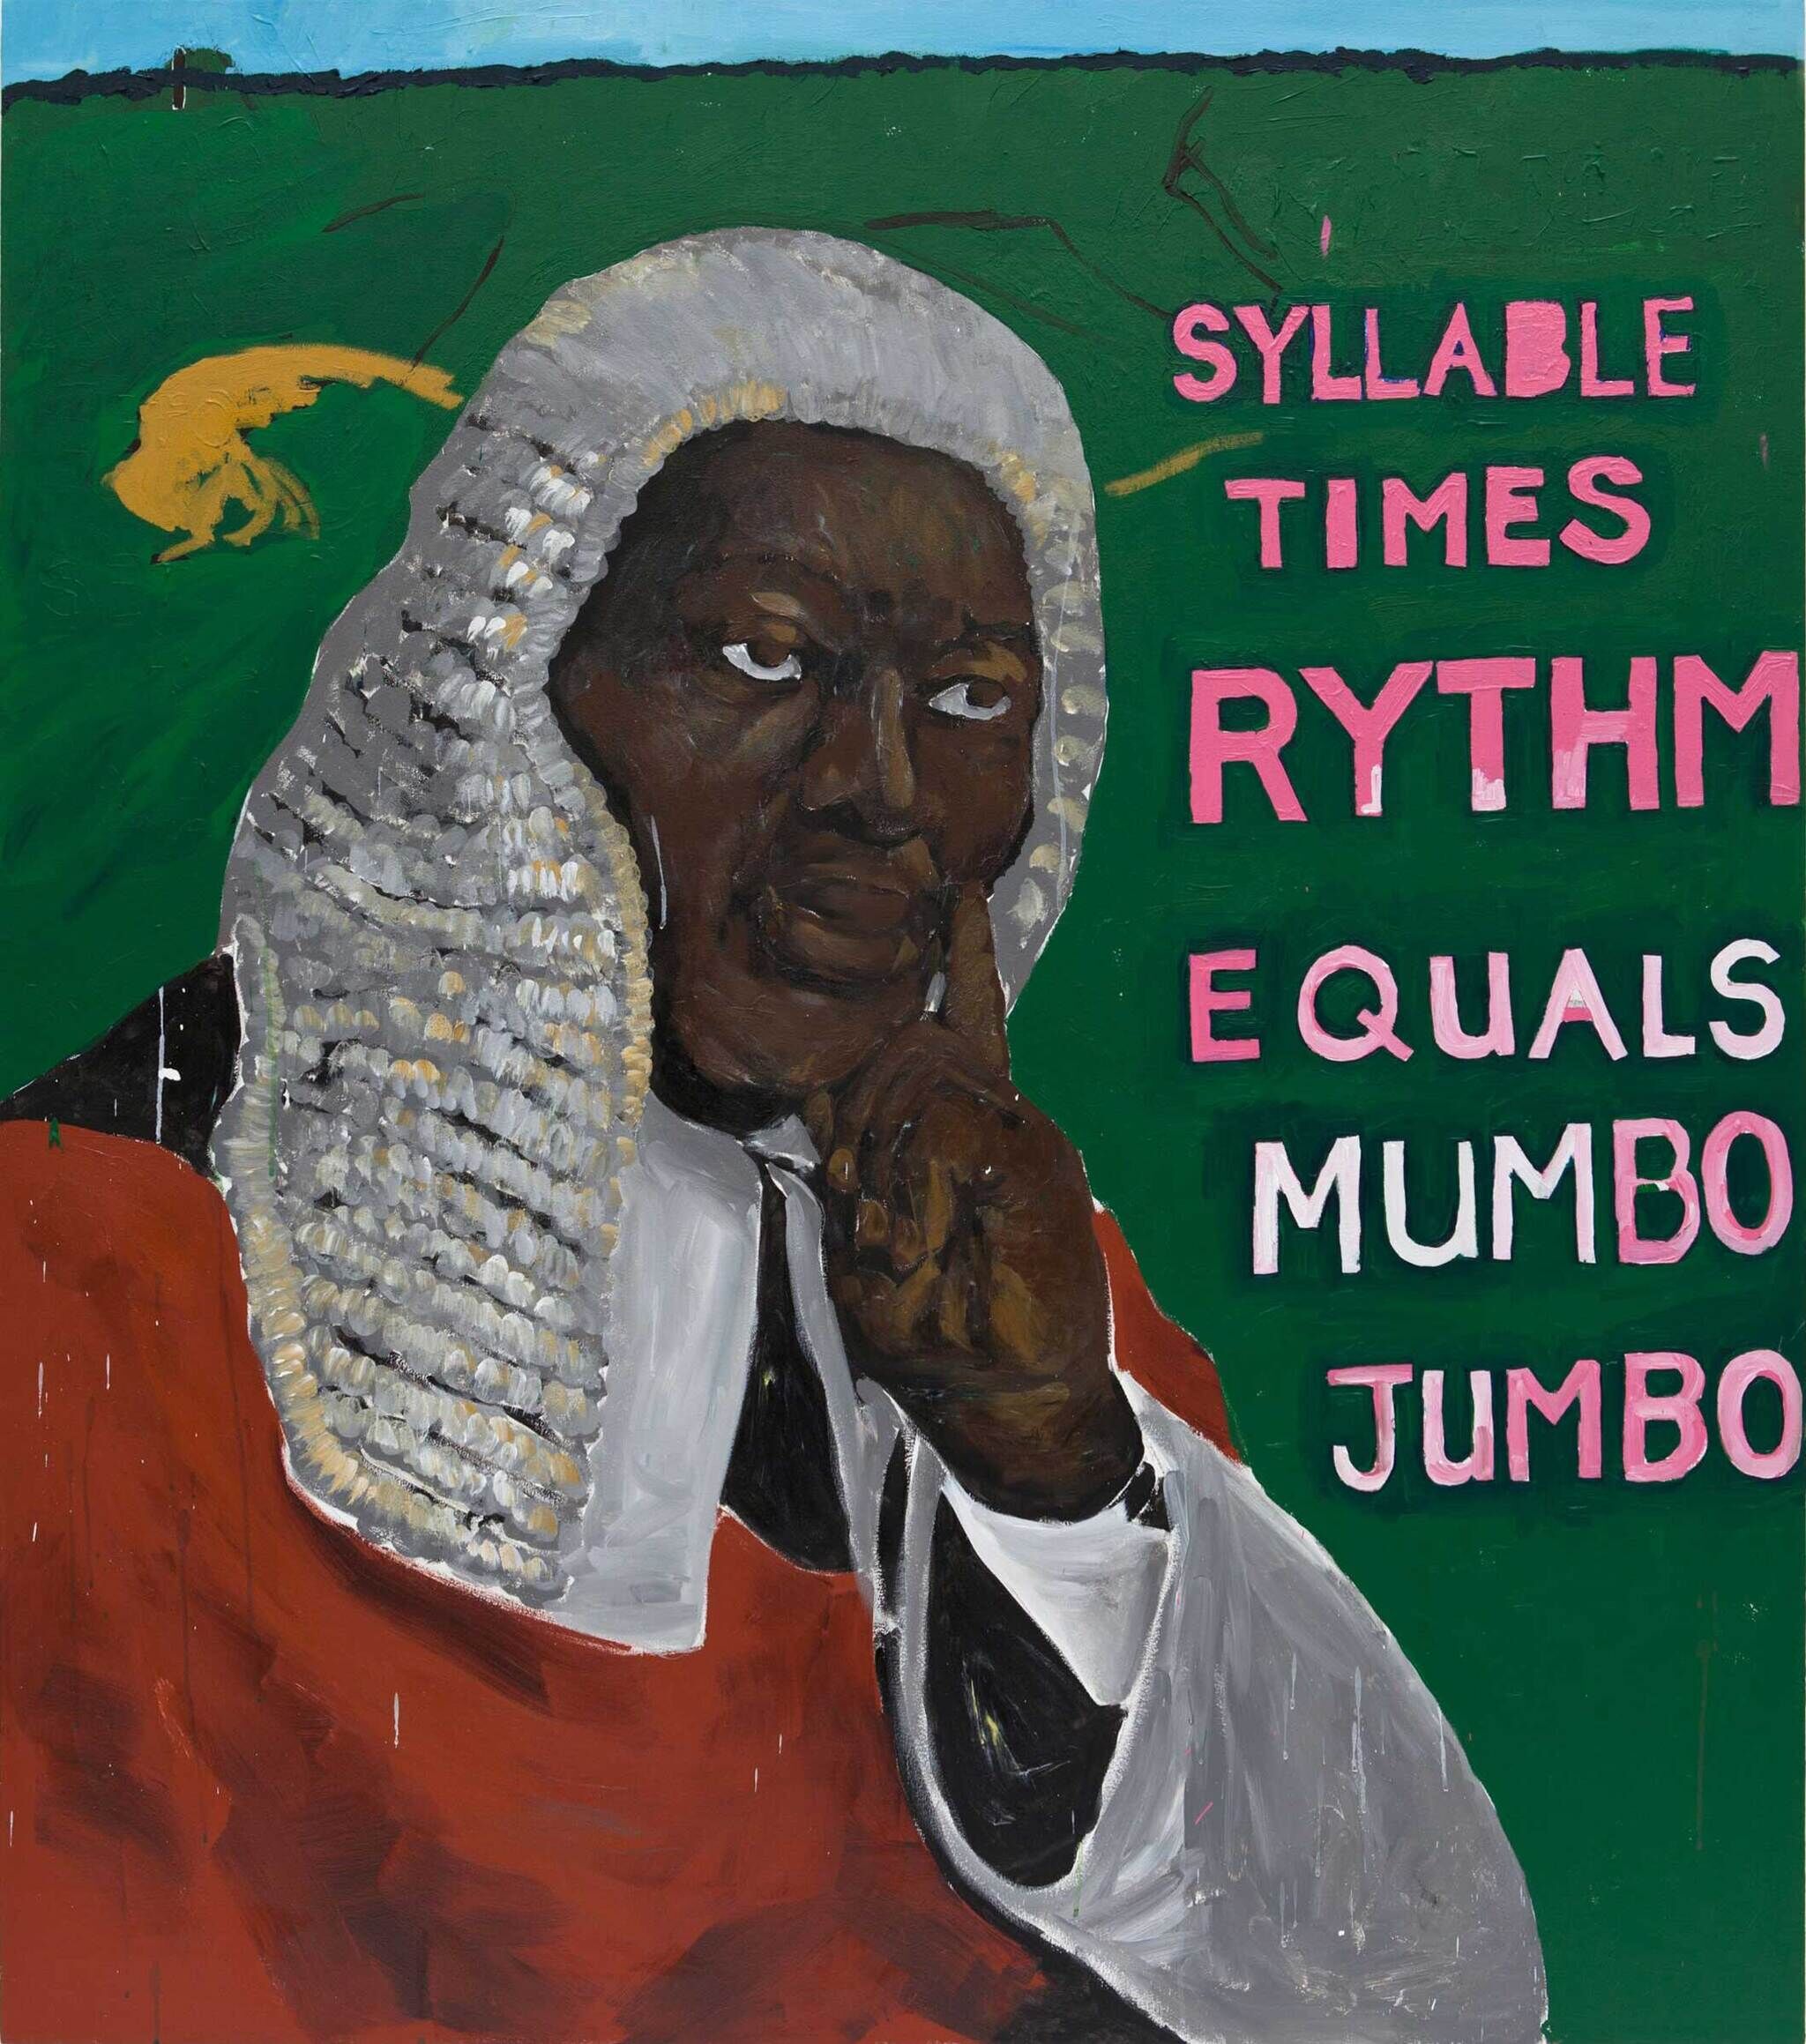 A portrait of a dark skinned person in a magistrate's attire and wig. To the right of them are the words "syllable times rythm equals mumbo jumbo" in pink letters. The background consists of green grass and a thin strip of blue sky at the top of the painting.